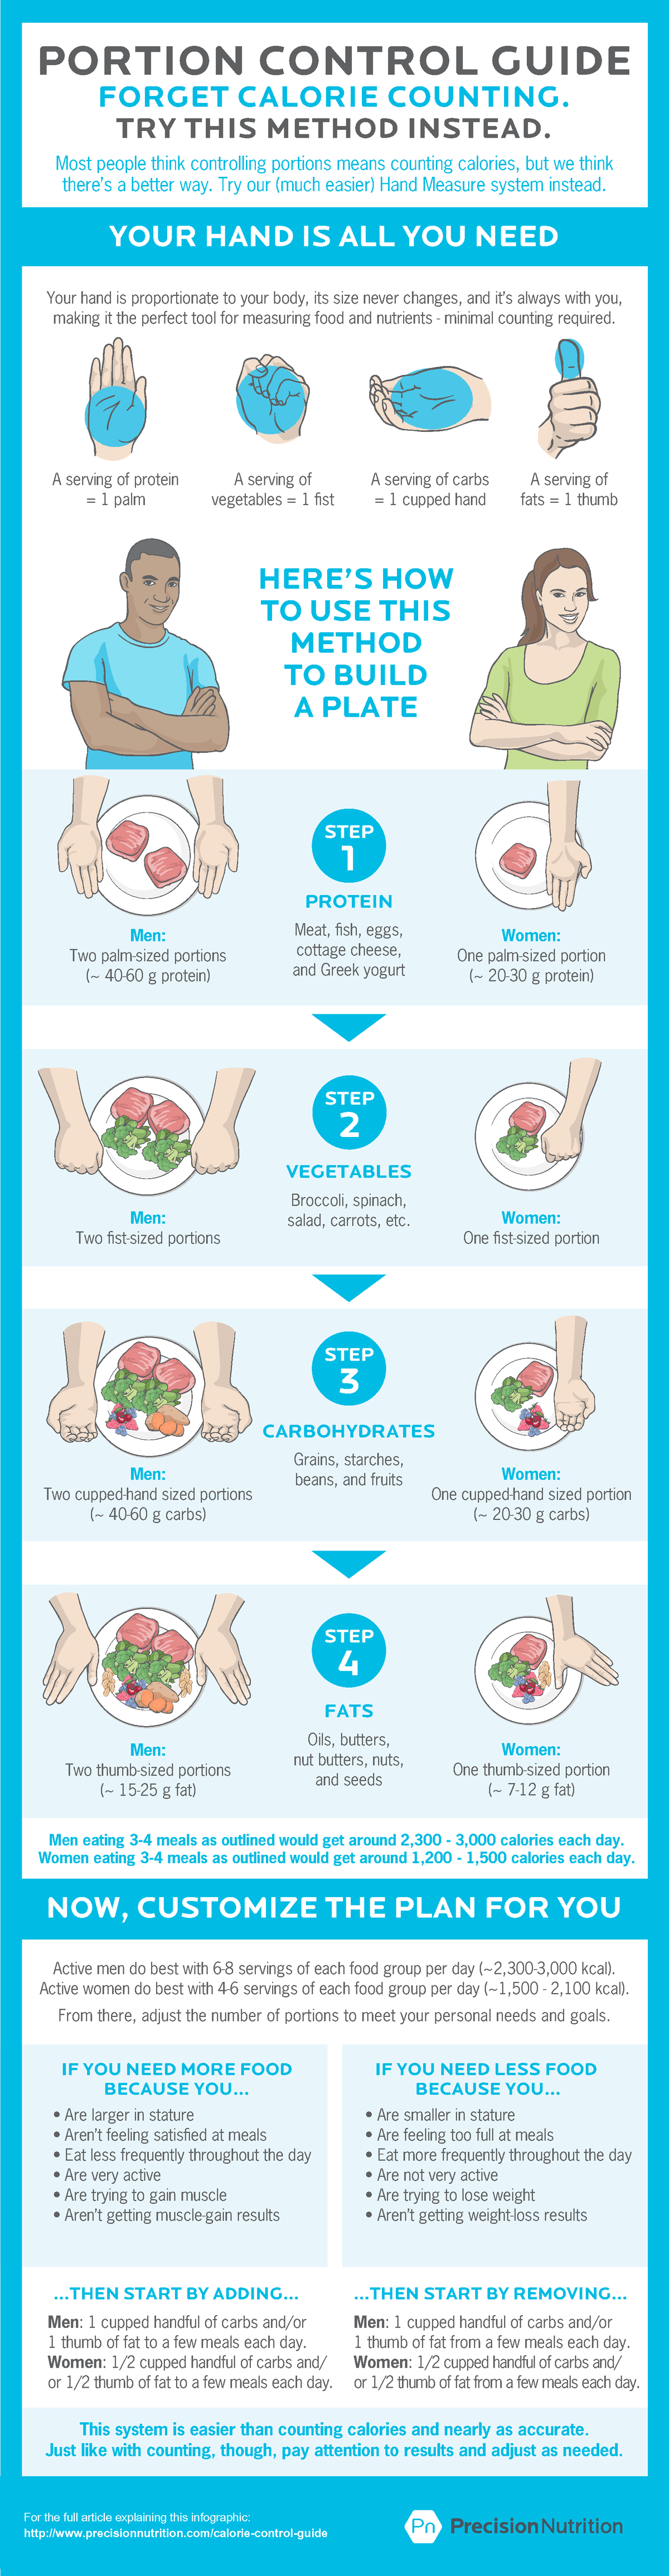 Portion Control Infographic Men And Women Portion Control Guide Forget Calorie Counting Try